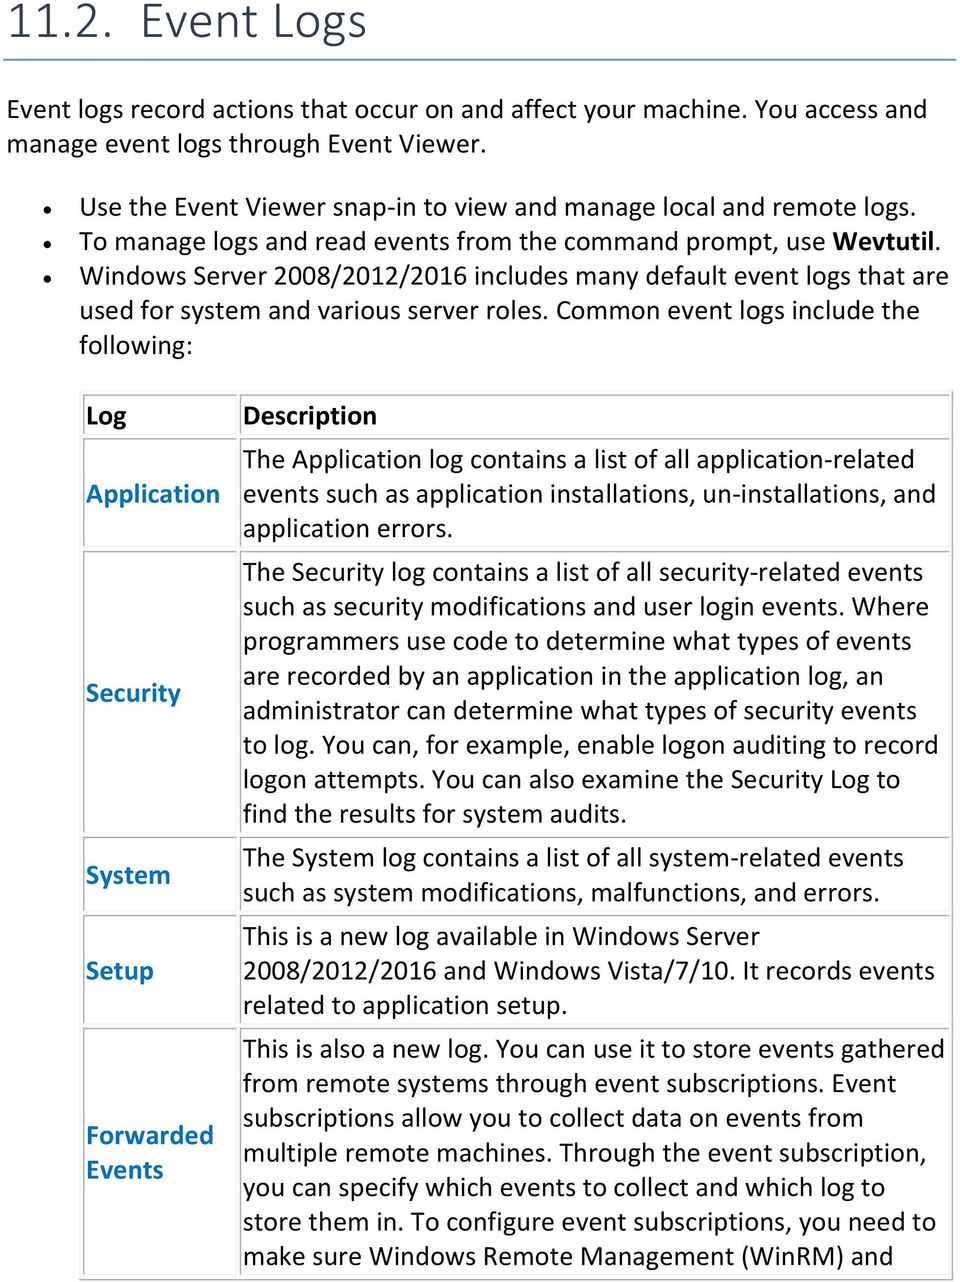 Windows Server 2008/2012/2016 includes many default event logs that are used for system and various server roles.